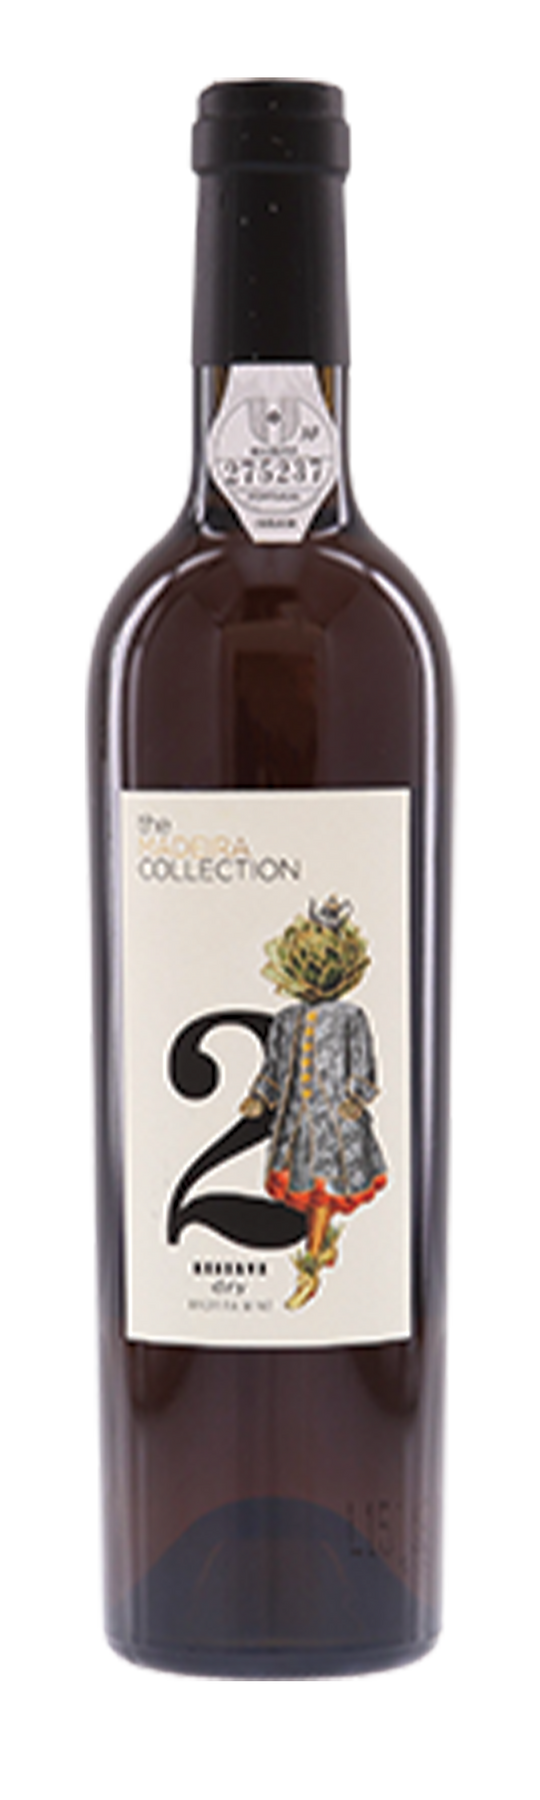 The Madeira Collection #2 20% 50cl